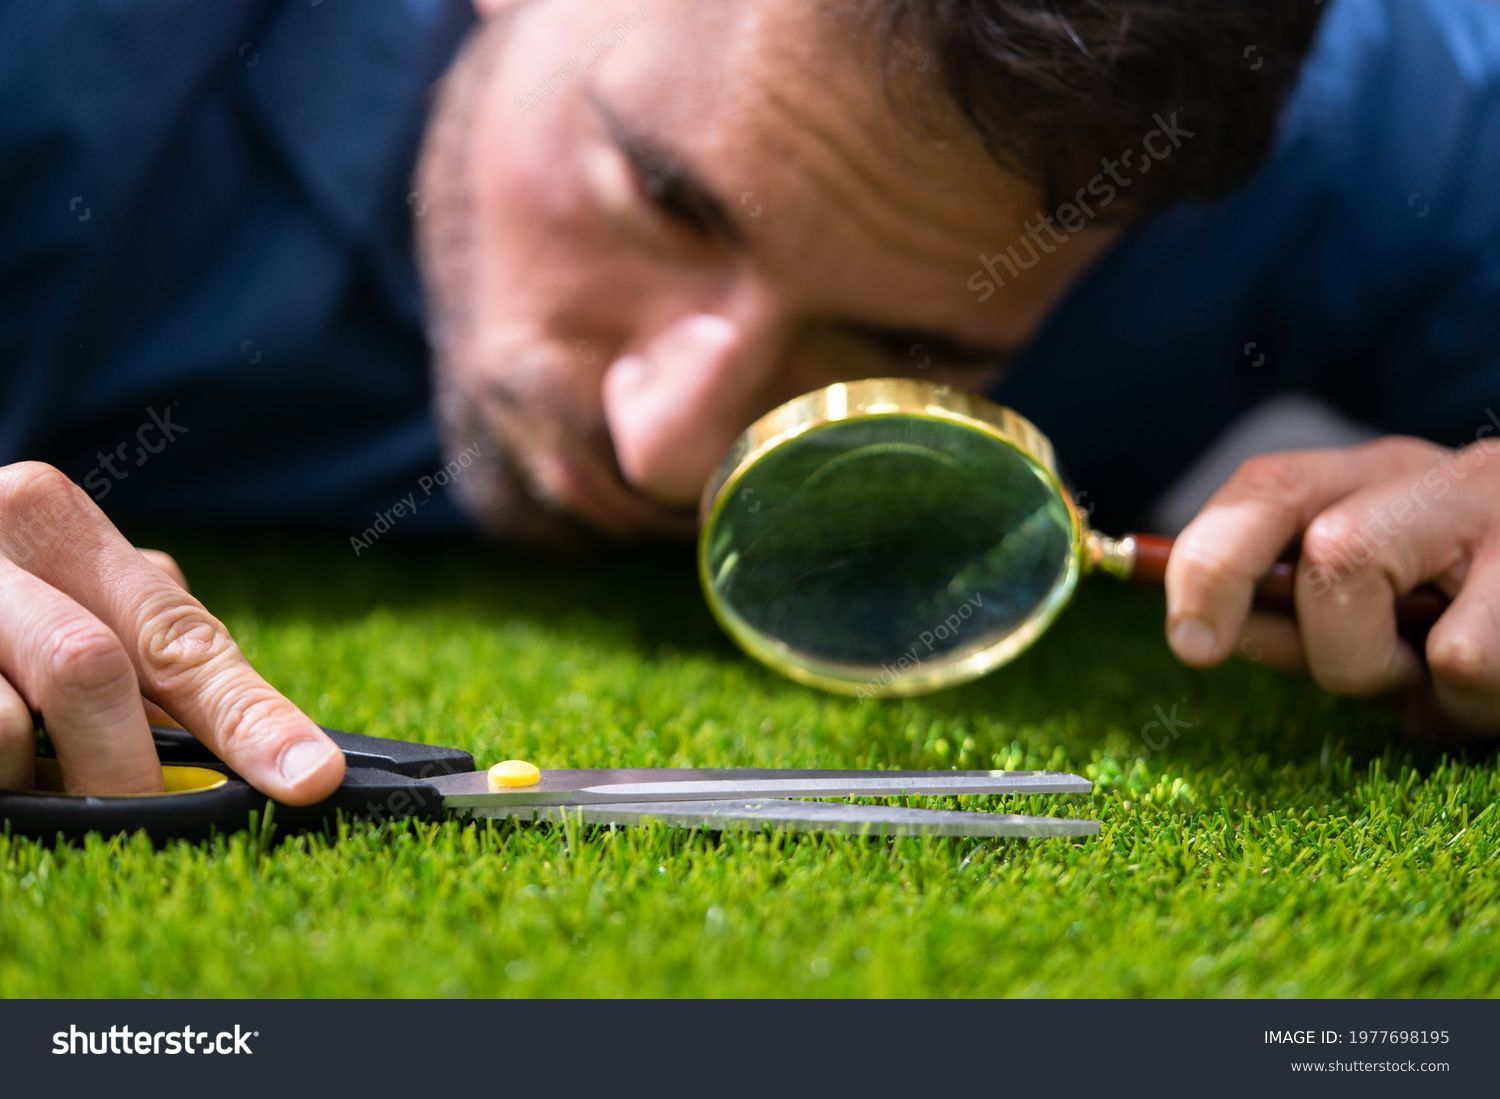 Compulsive Obsessive Disorder. Perfectionist Cutting Garden Grass #1977698195